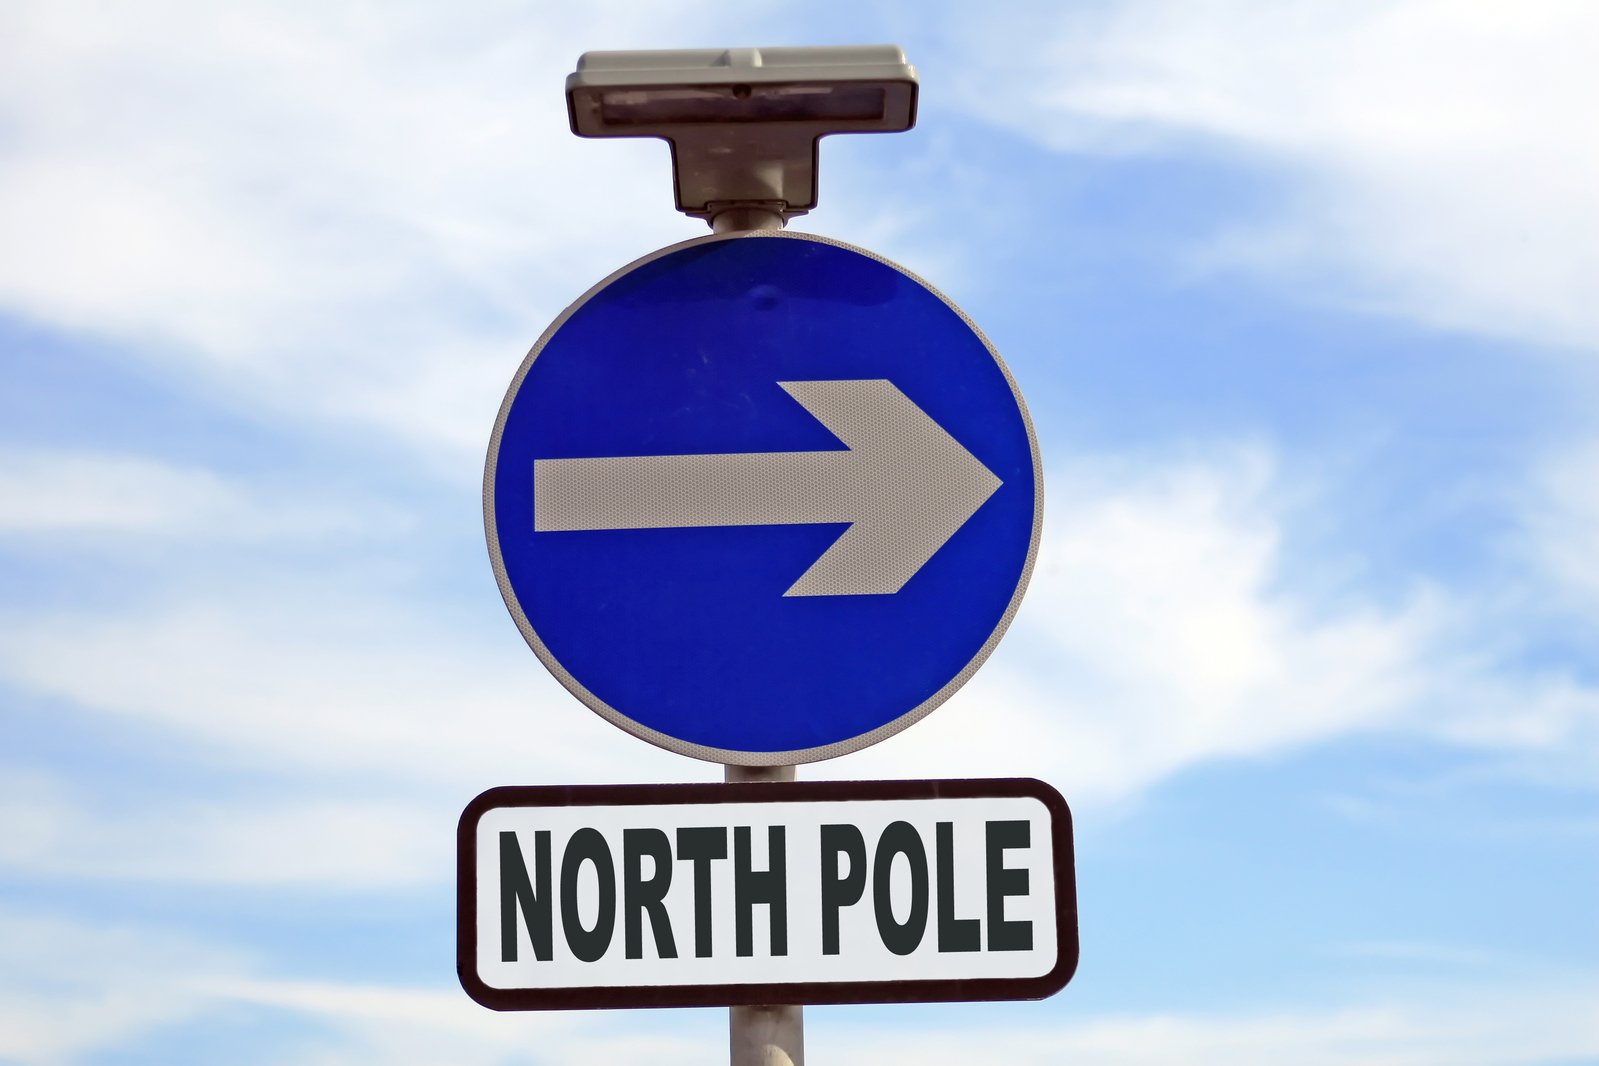 a sign pointing to the right with the word north pole and arrow pointing upward